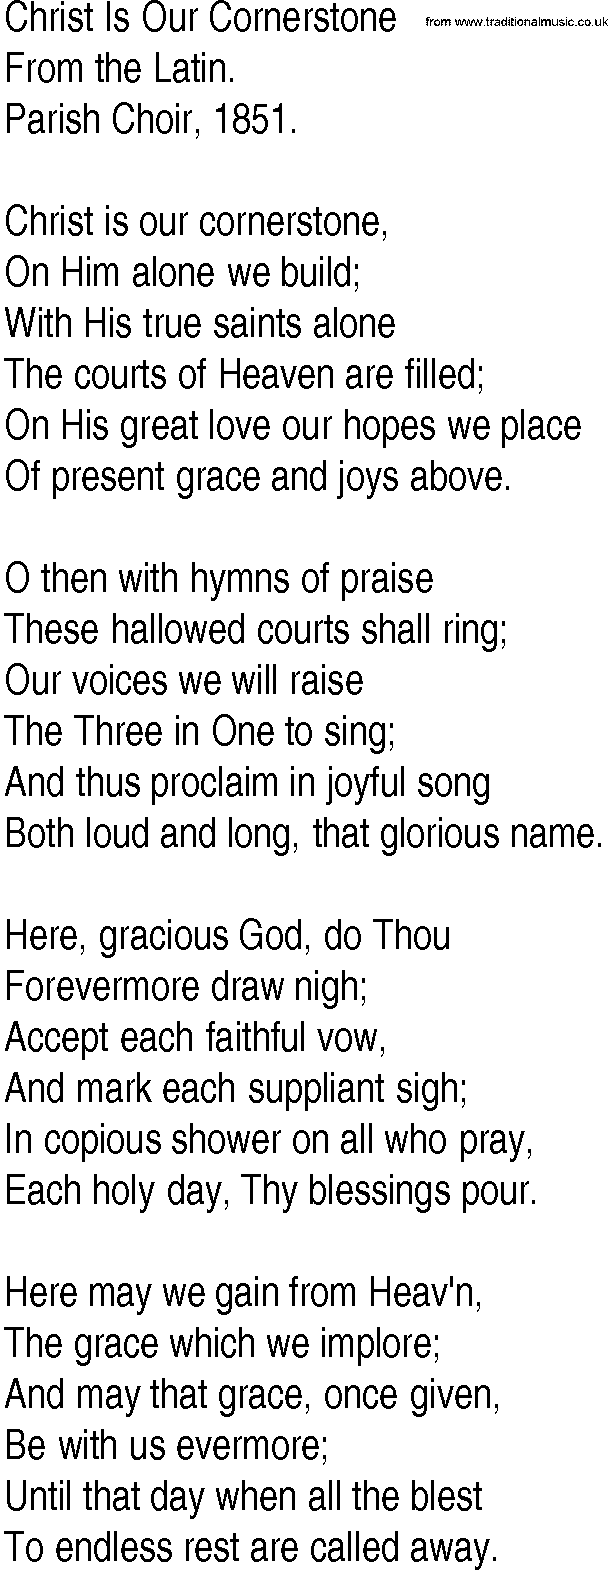 Hymn and Gospel Song: Christ Is Our Cornerstone by From the Latin lyrics